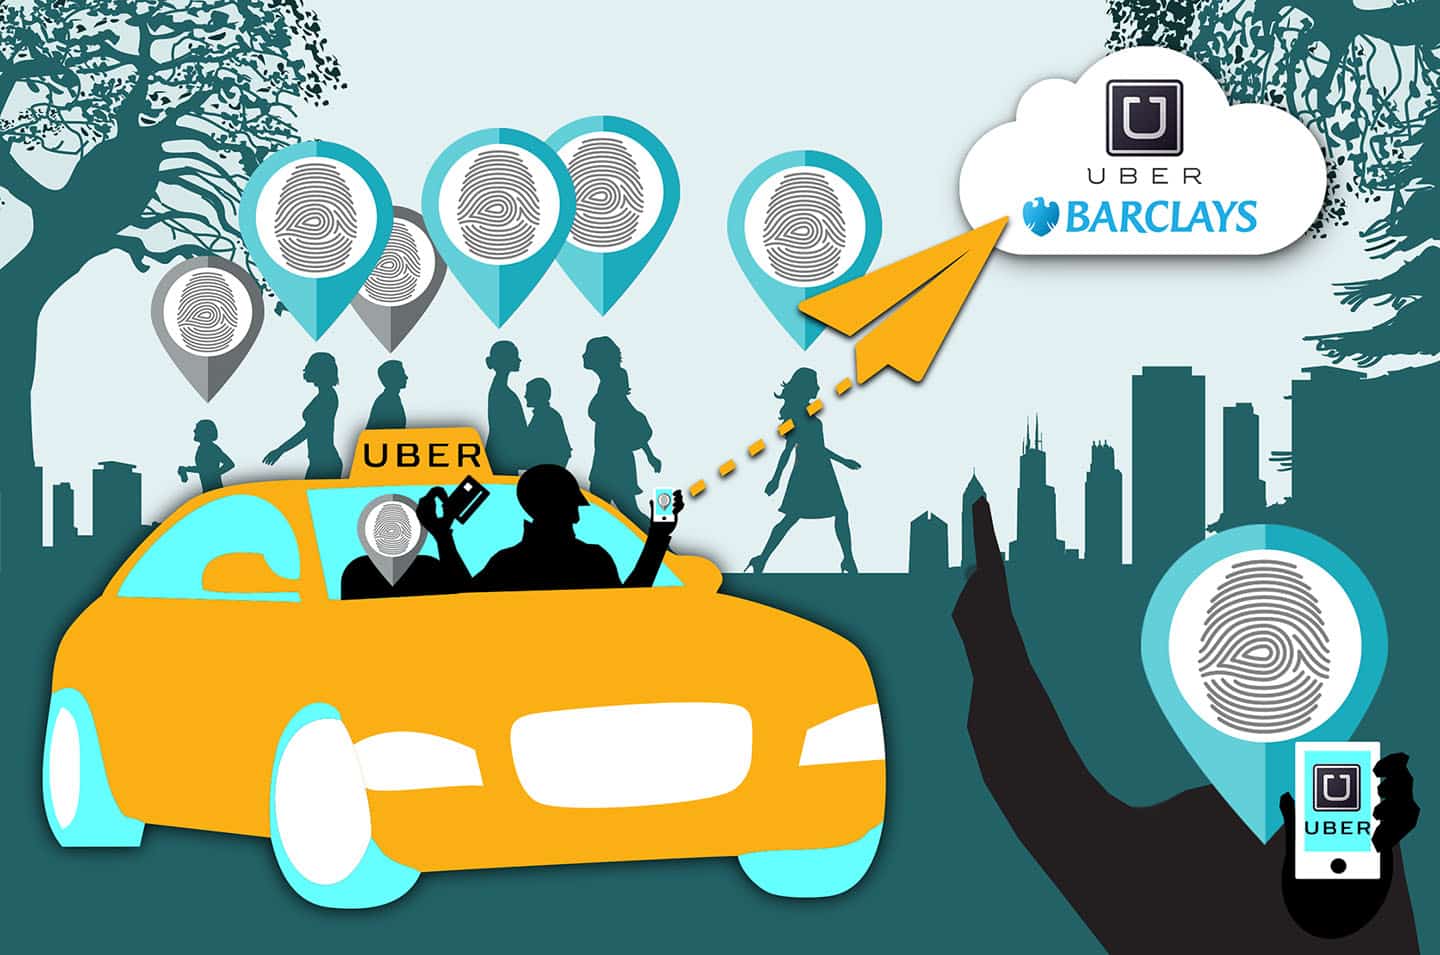 Facebook on Wheels: Why the Uber/Barclays Co-Brand Card Is Big News